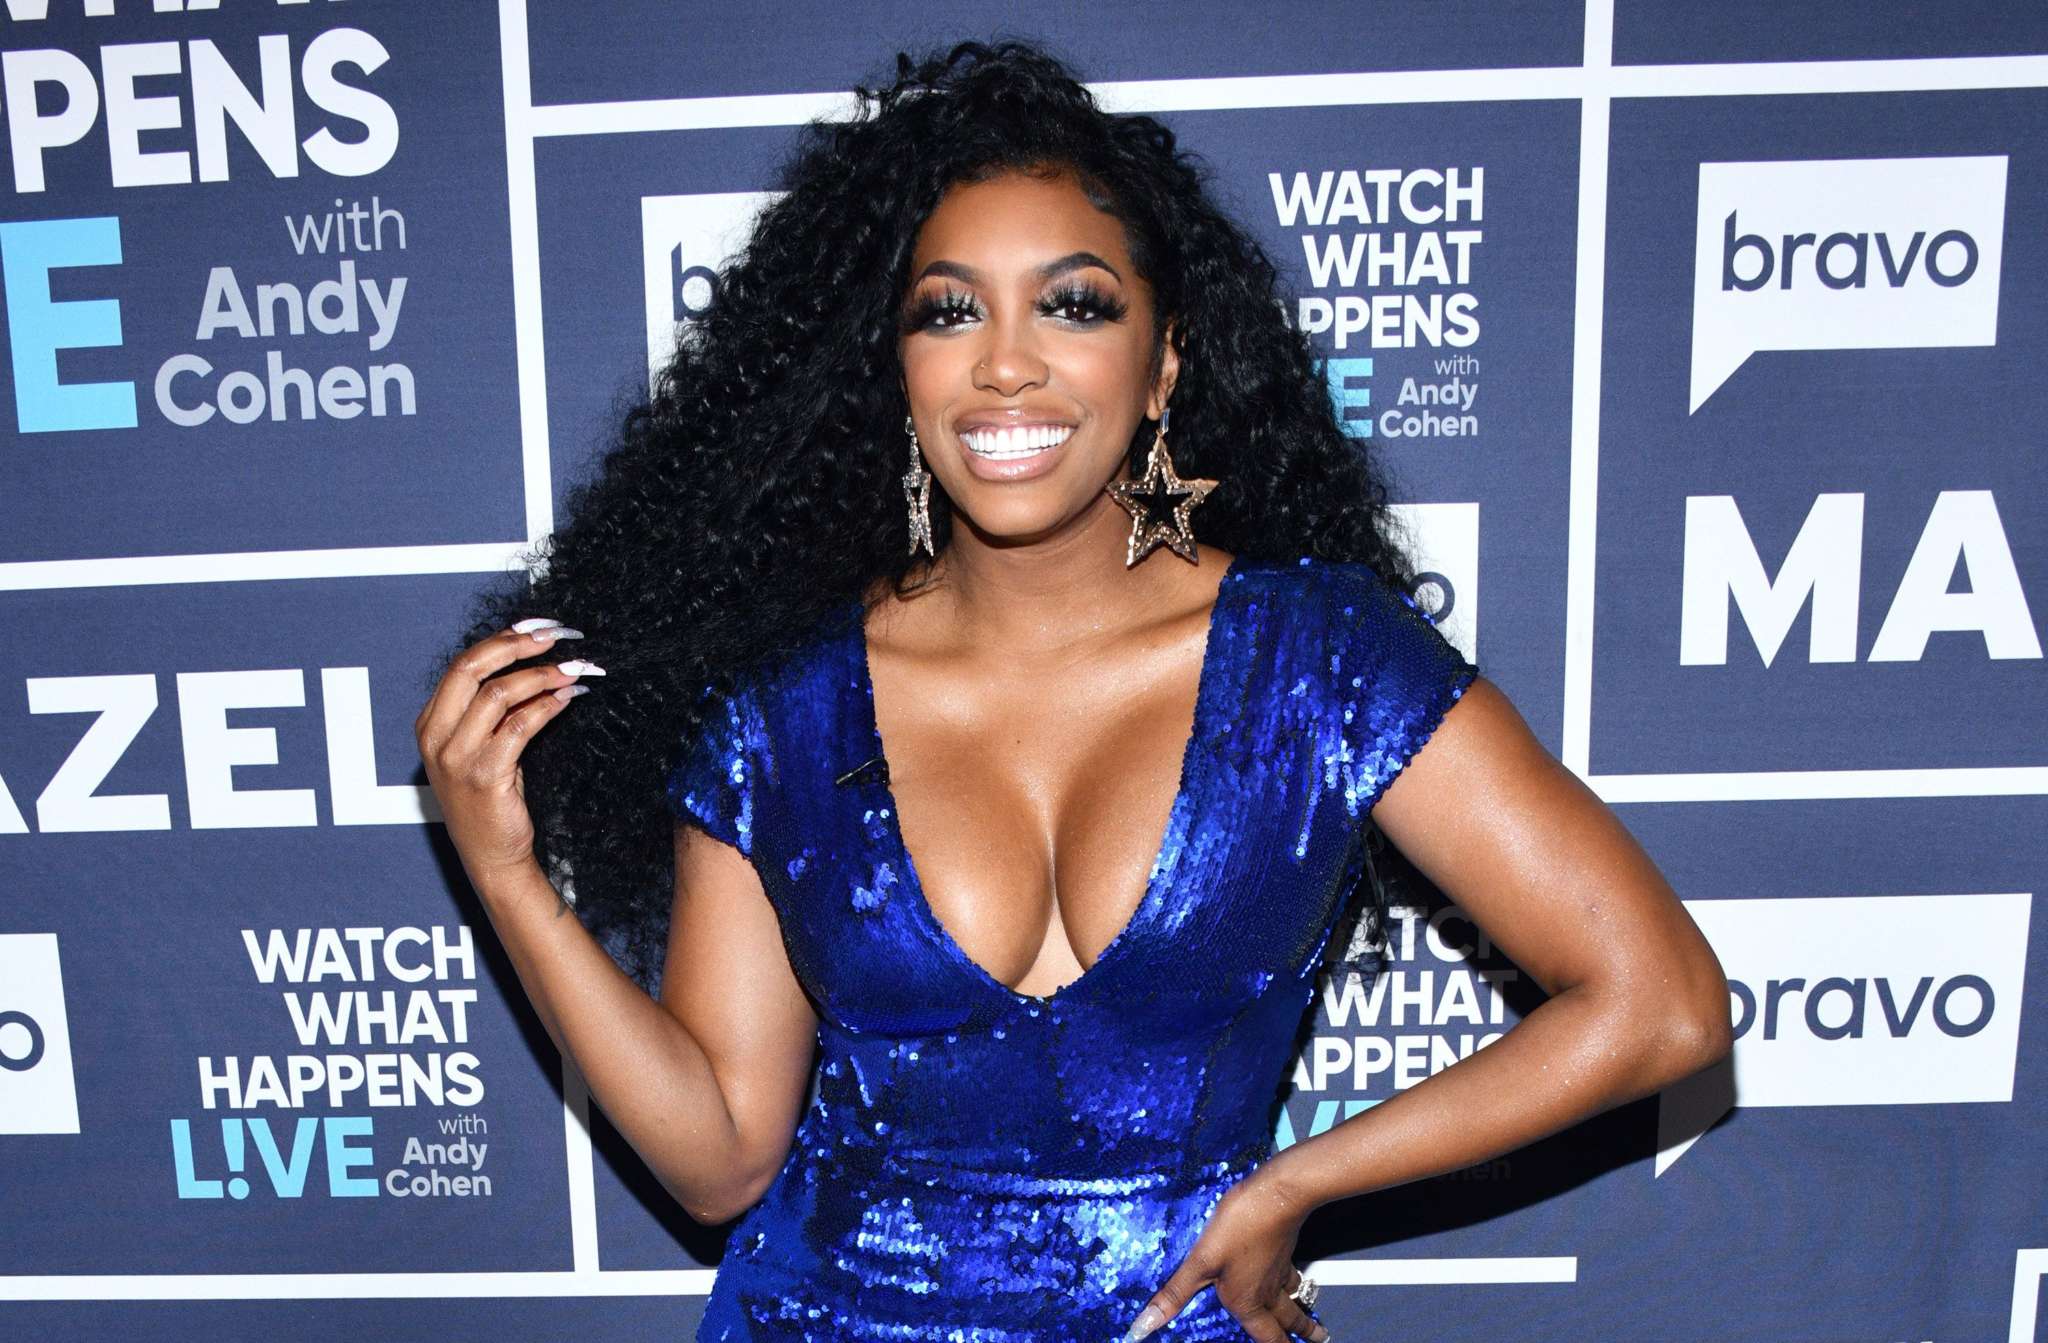 Porsha Williams Drops An Important Message For Her Fans